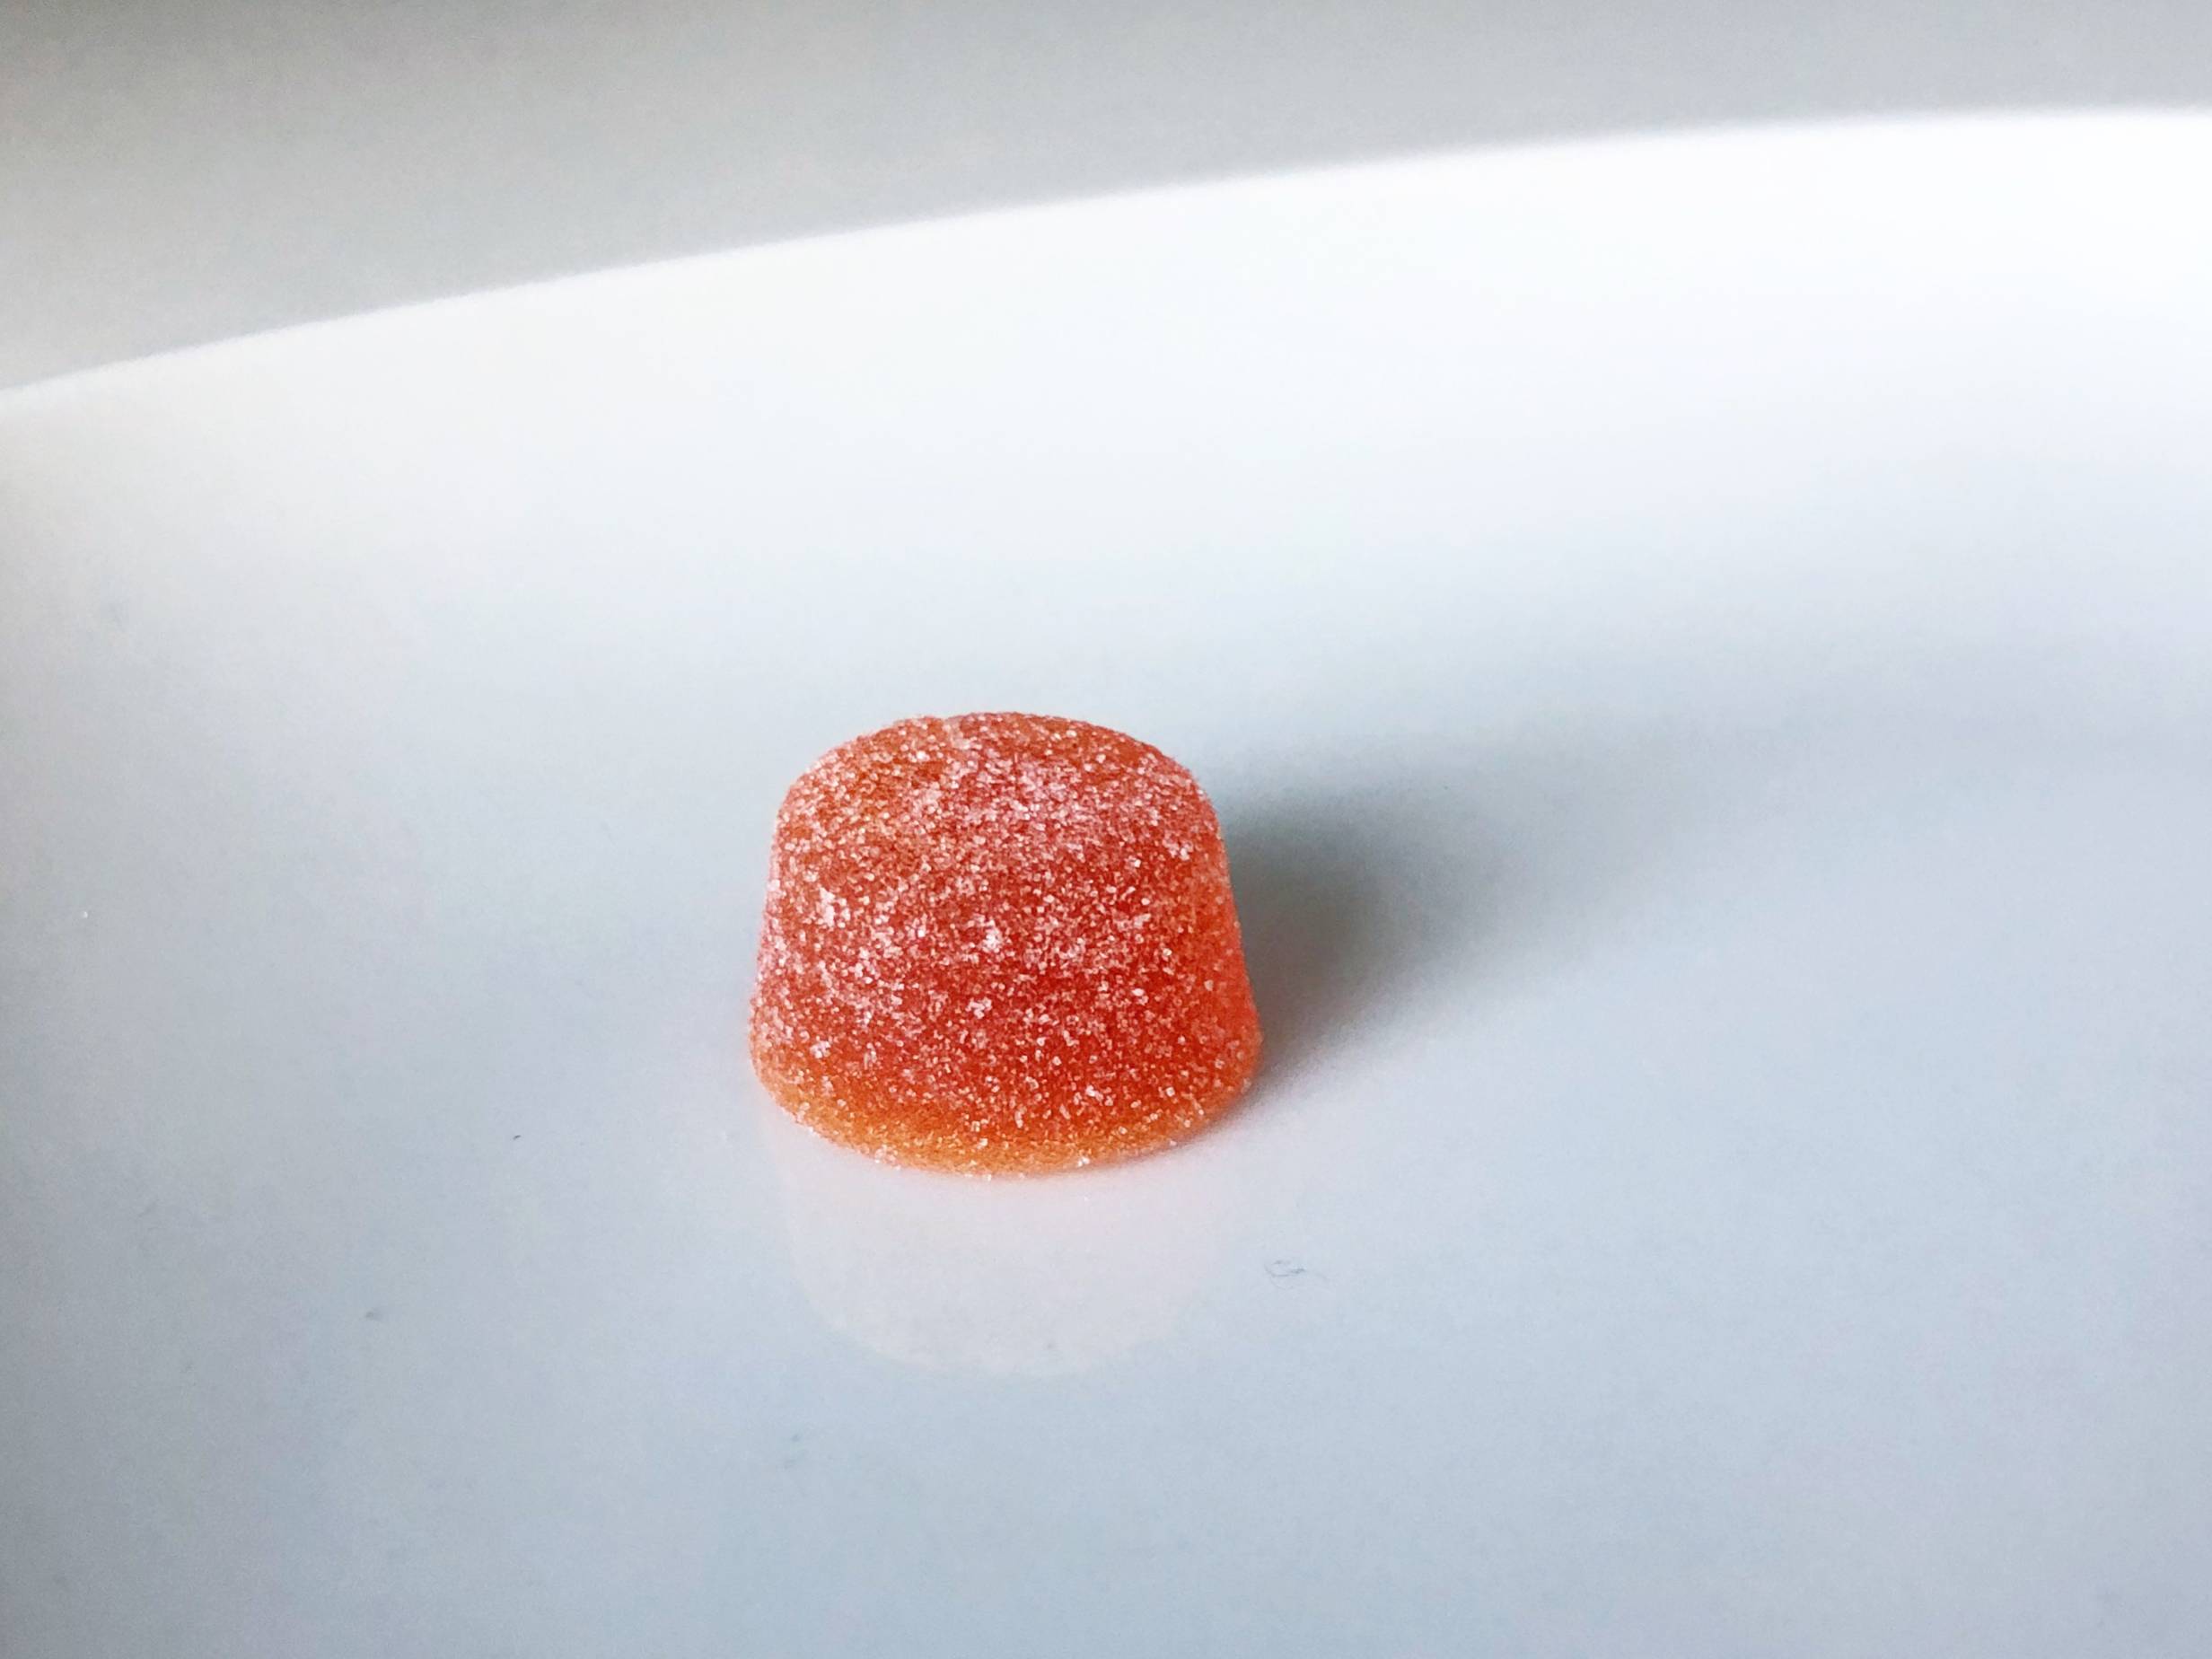 A small cannabis-infused orange gummy covered in sugar sits on a white plate. Photo by Alyssa Buckley.